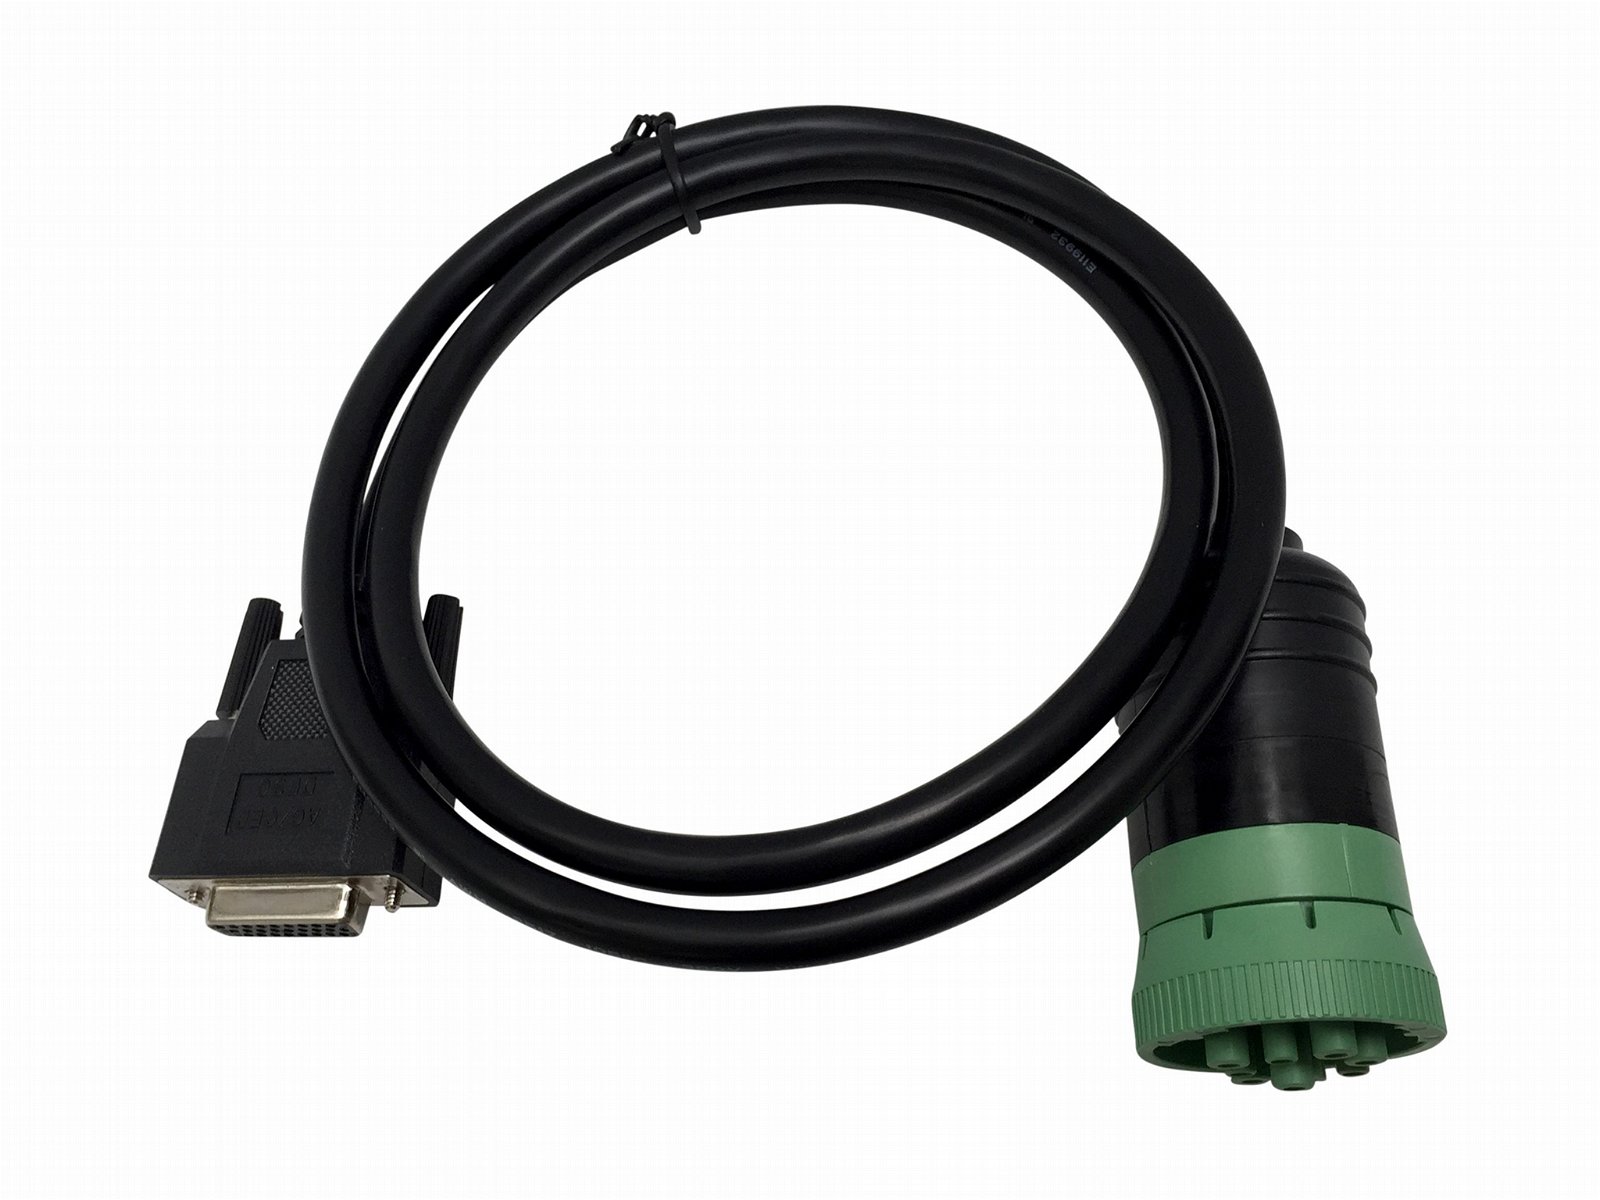  John Deere Equipment for W1 Connector Cable 